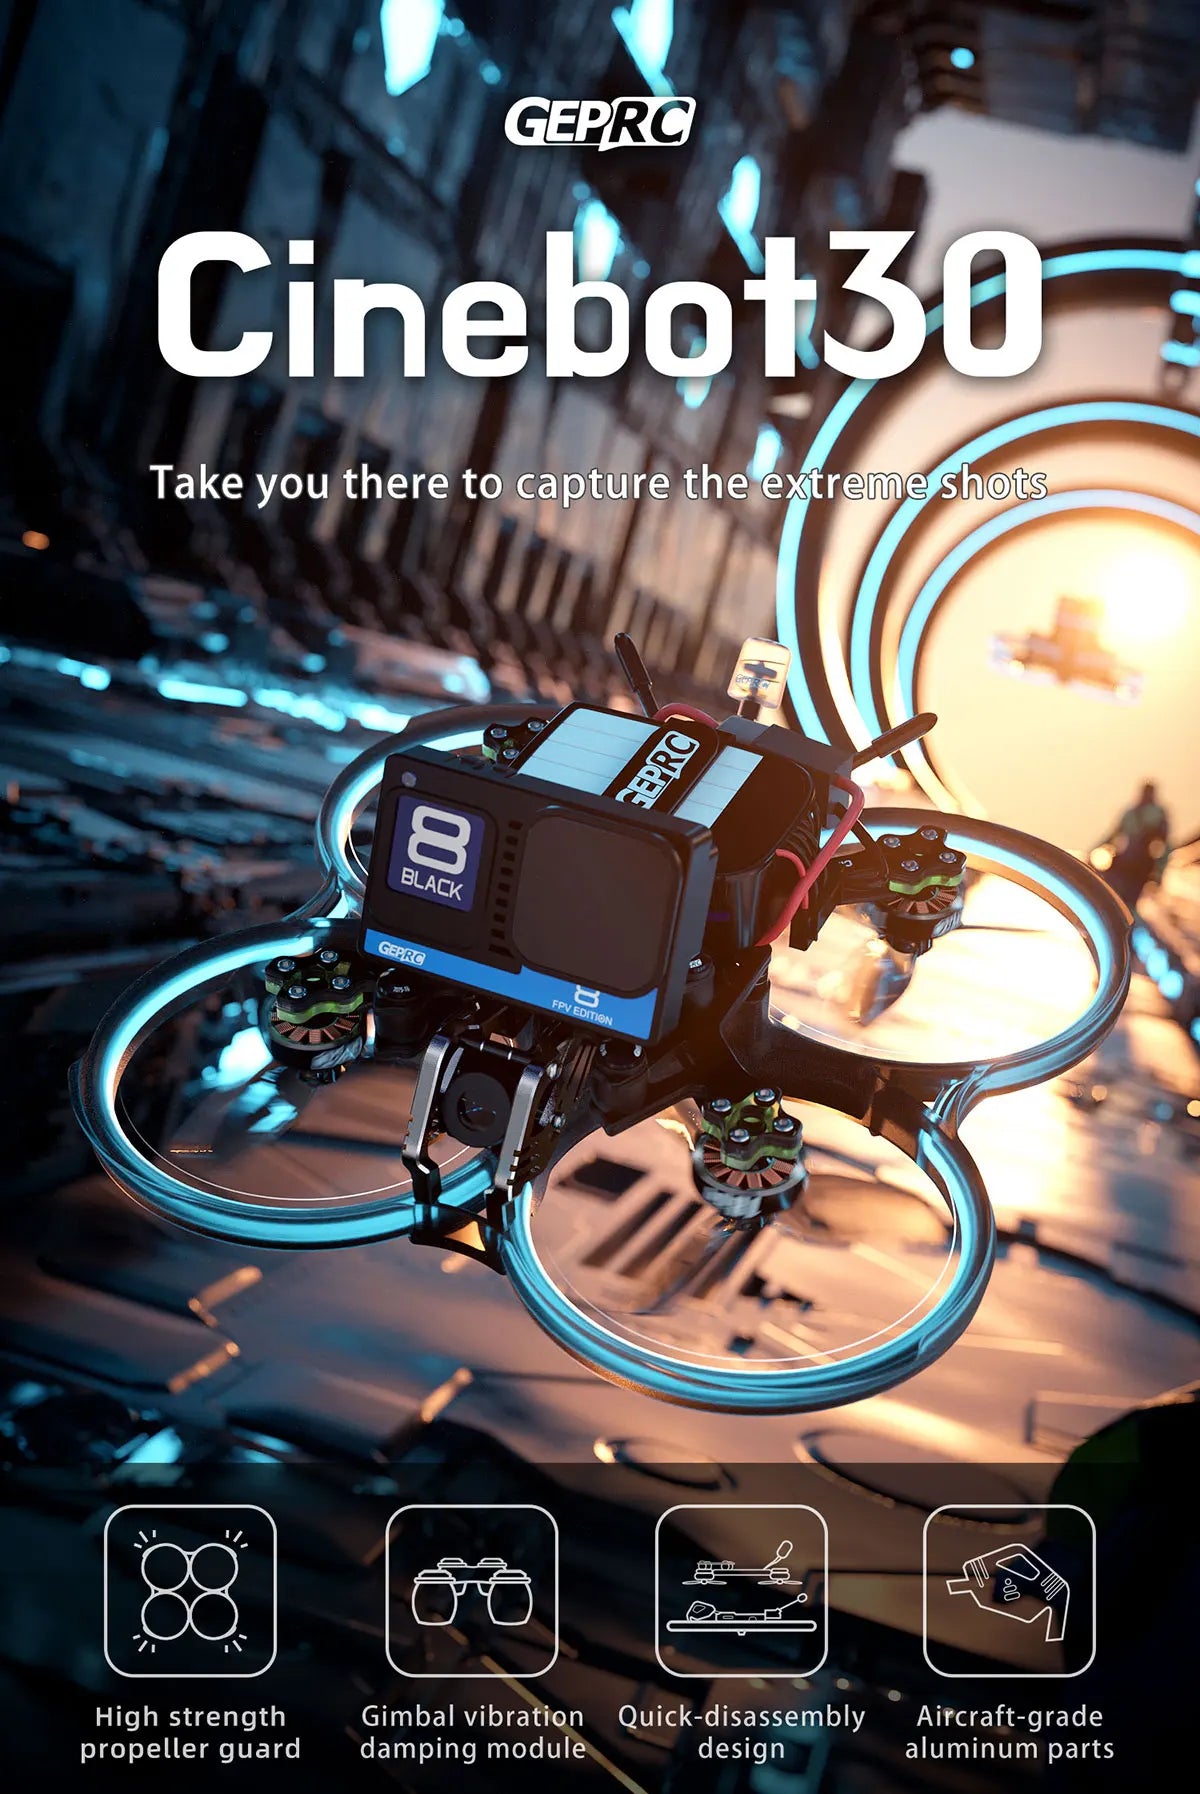 GEPRC Cinebot30 HD - Runcam Link Wasp 4S FPV, GEPRC Cinebot30 HD, GEPRC Cinebot3o Take you there to capture the exitreme shots 8 